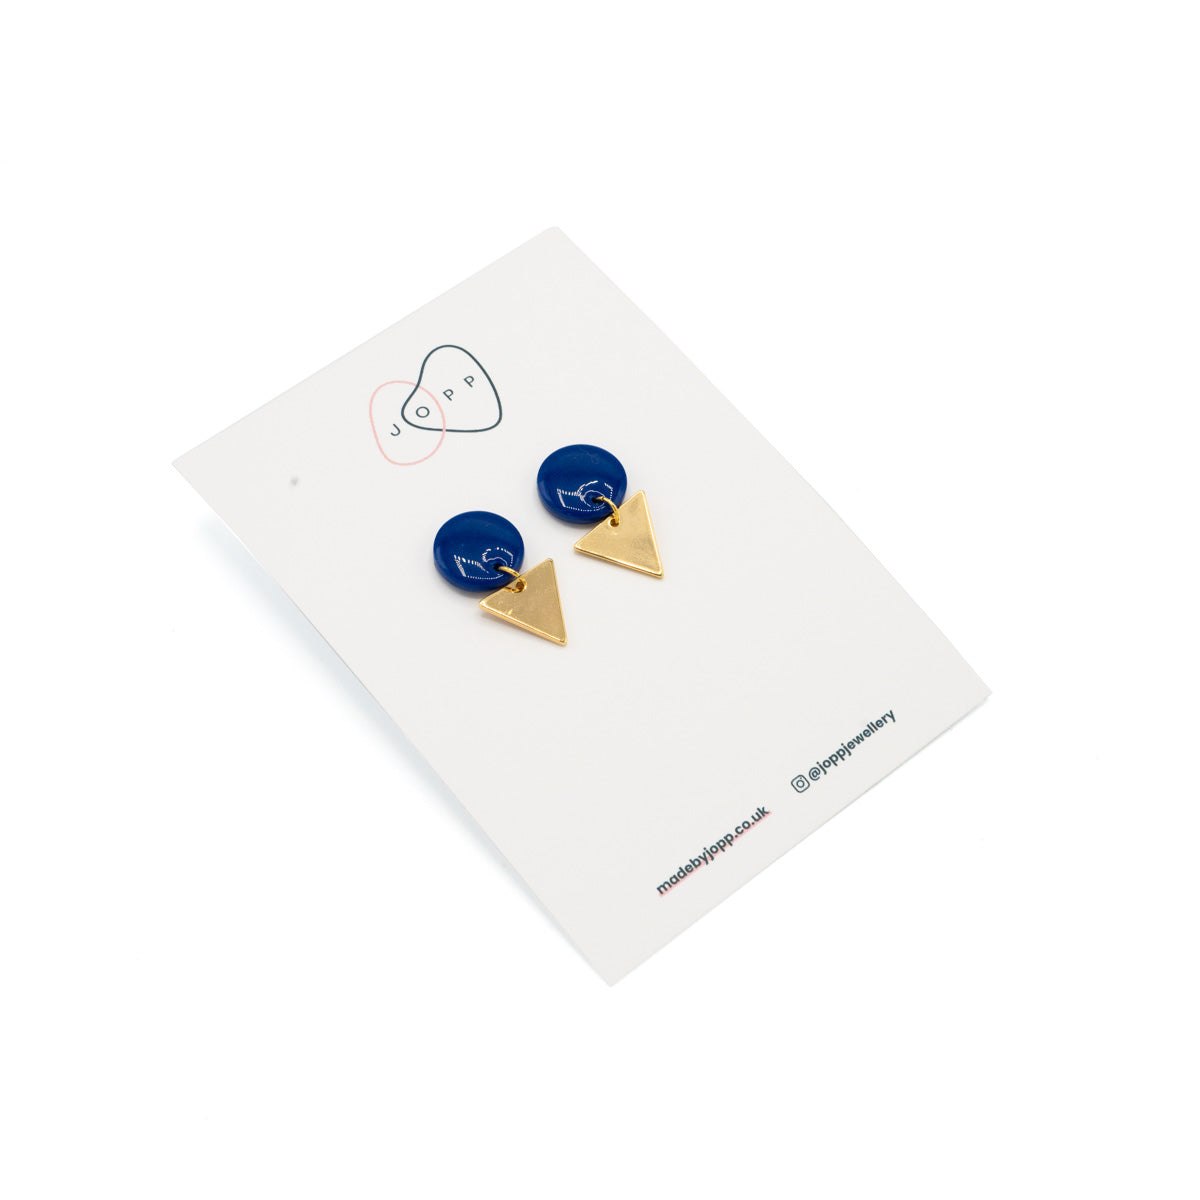 Earrings with a blue circle at the top, attached to a gold triangle underneath. Photographed against Jopp branded backing card.